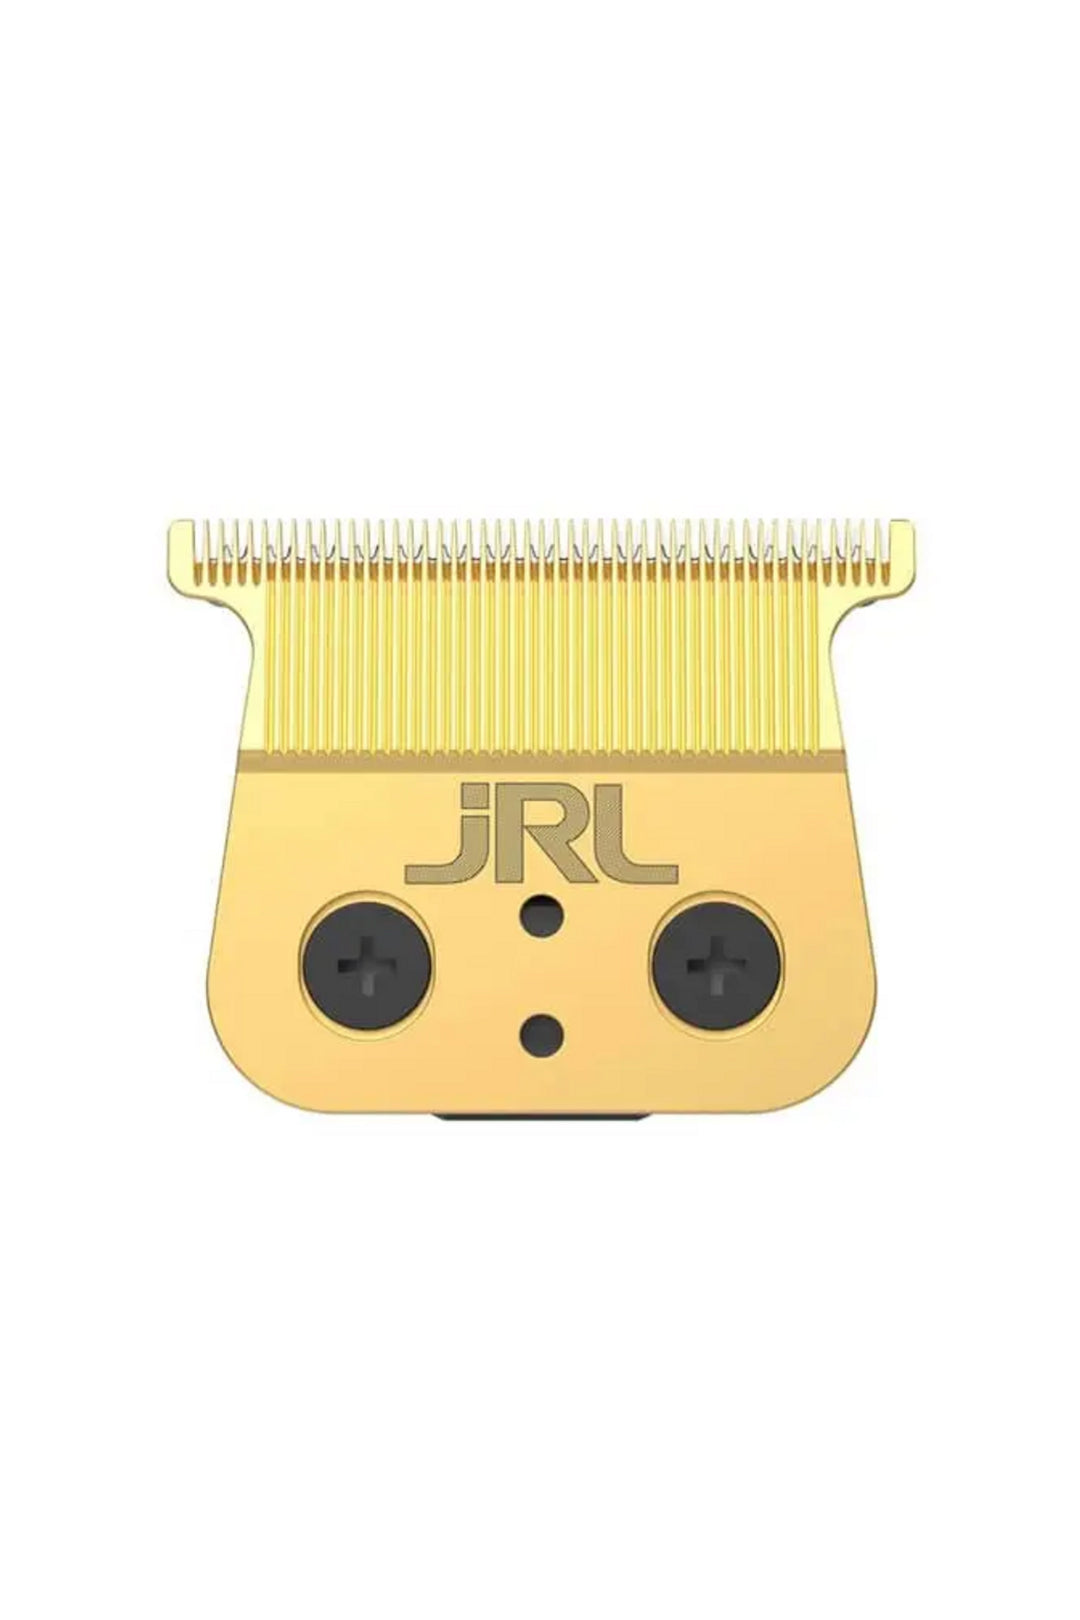 JRL TRIMMER REPLACEMENT BLADE GOLD